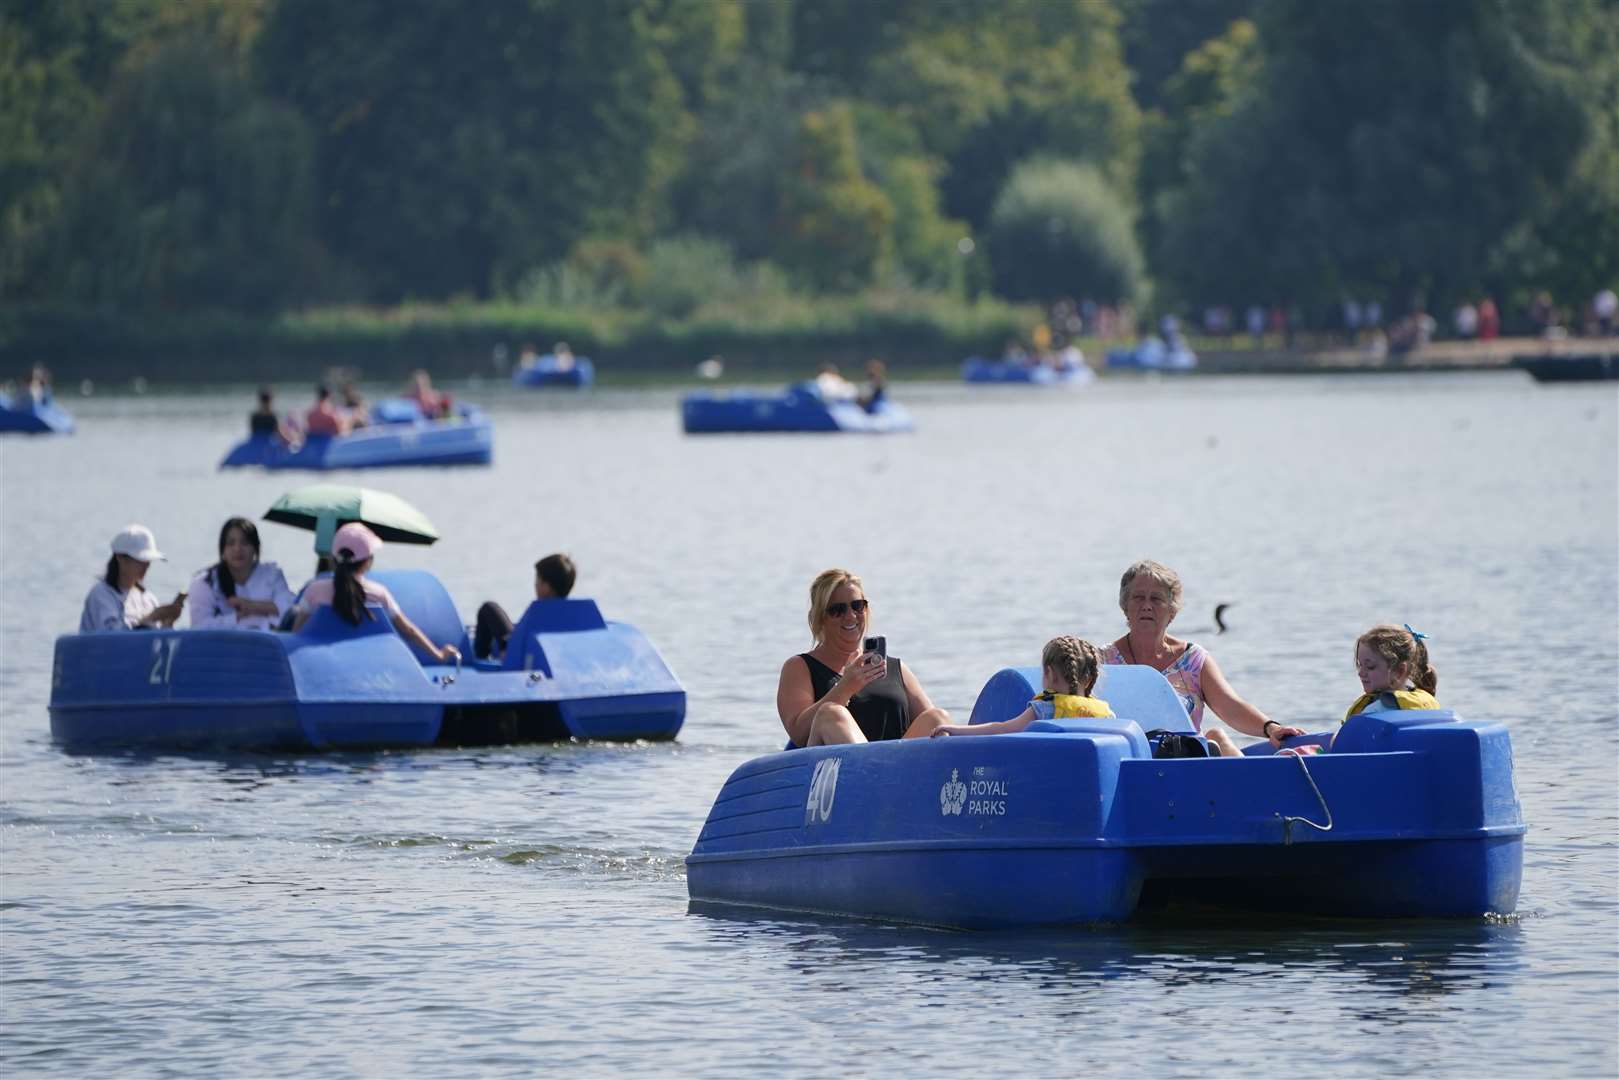 People enjoy the warm weather boating in Hyde Park in central London (Jonathan Brady/PA)